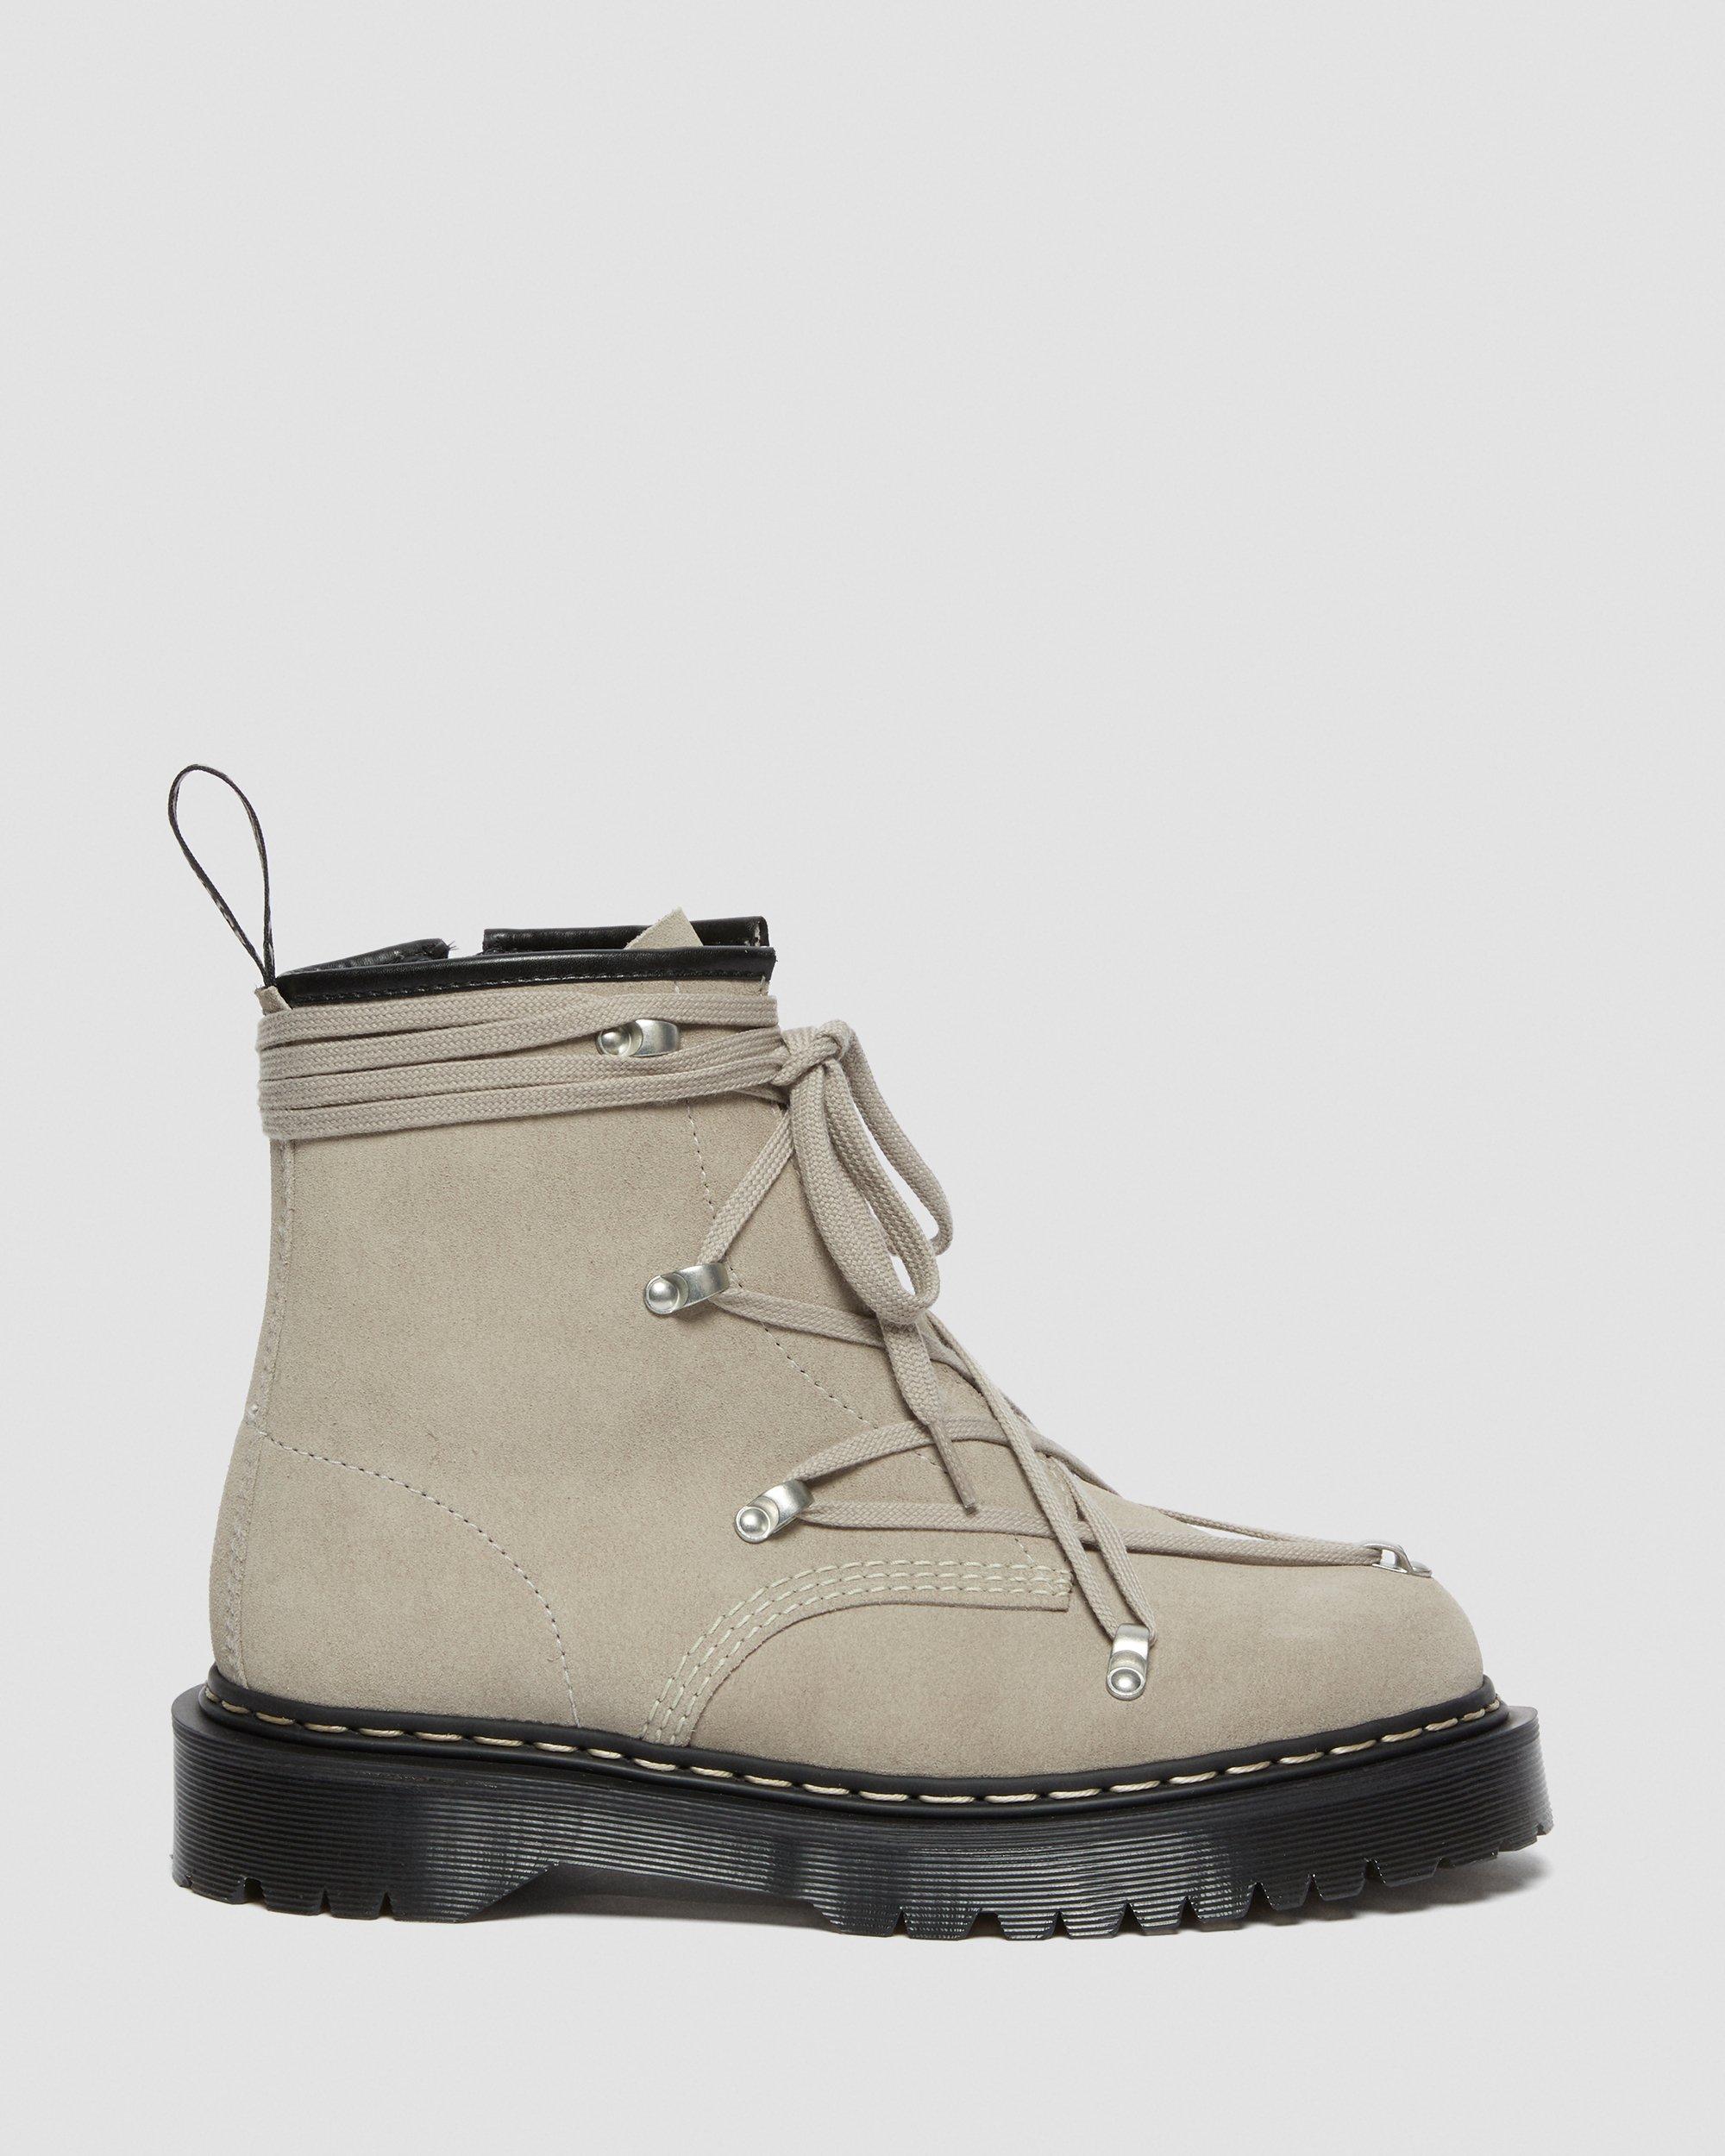 1460 Bex Rick Owens Boots in Light Taupe